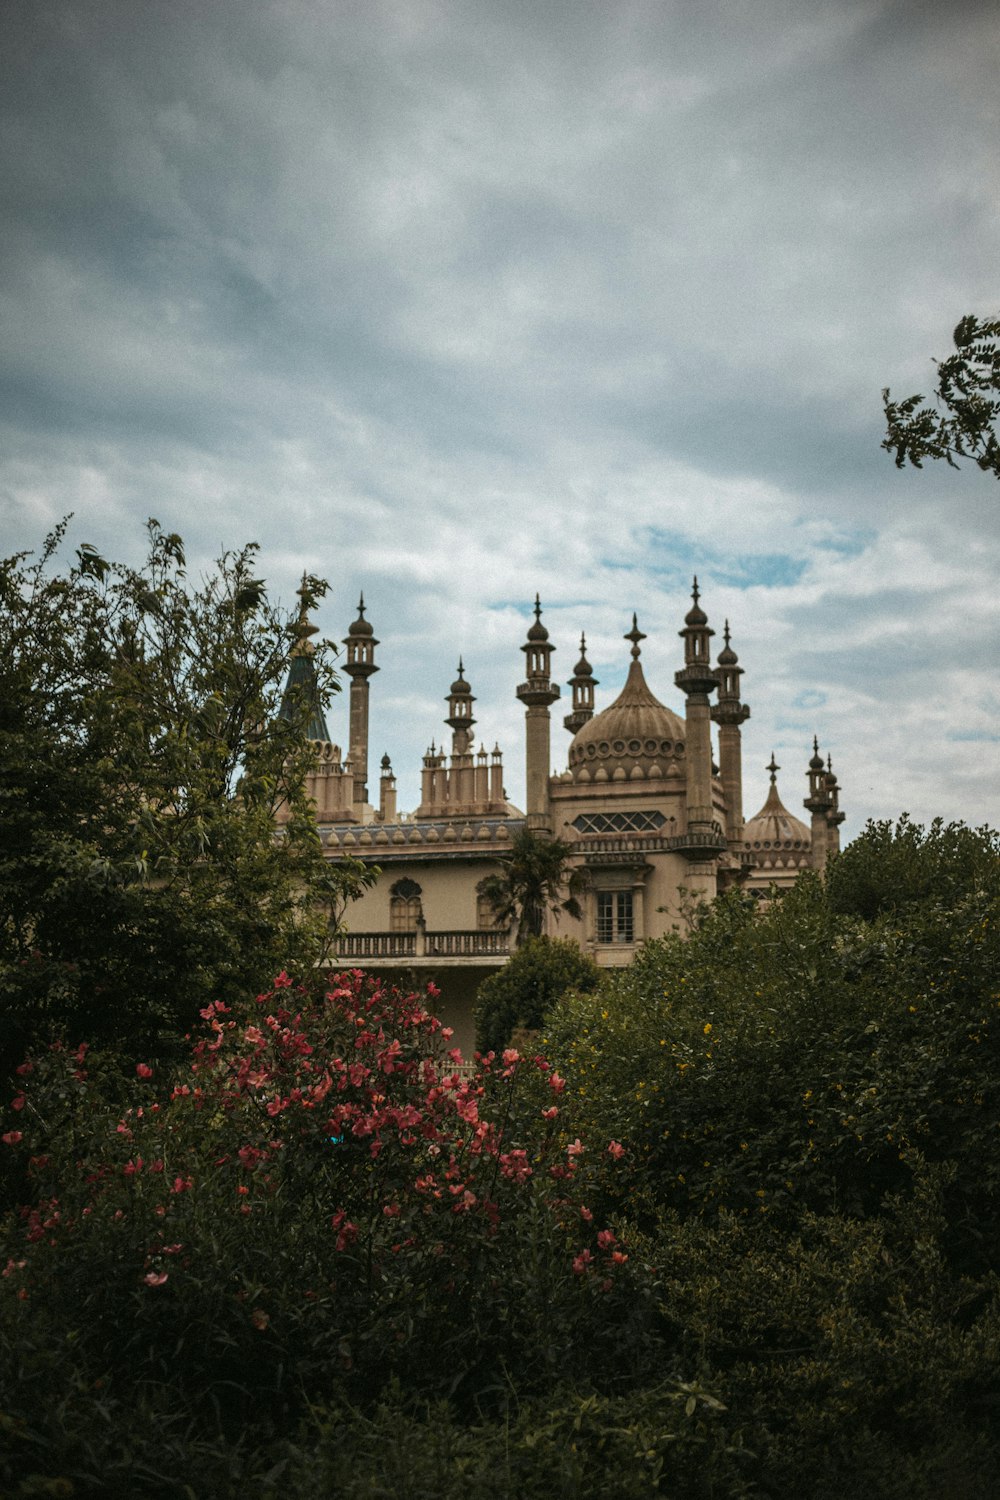 a large building with towers and spires surrounded by trees